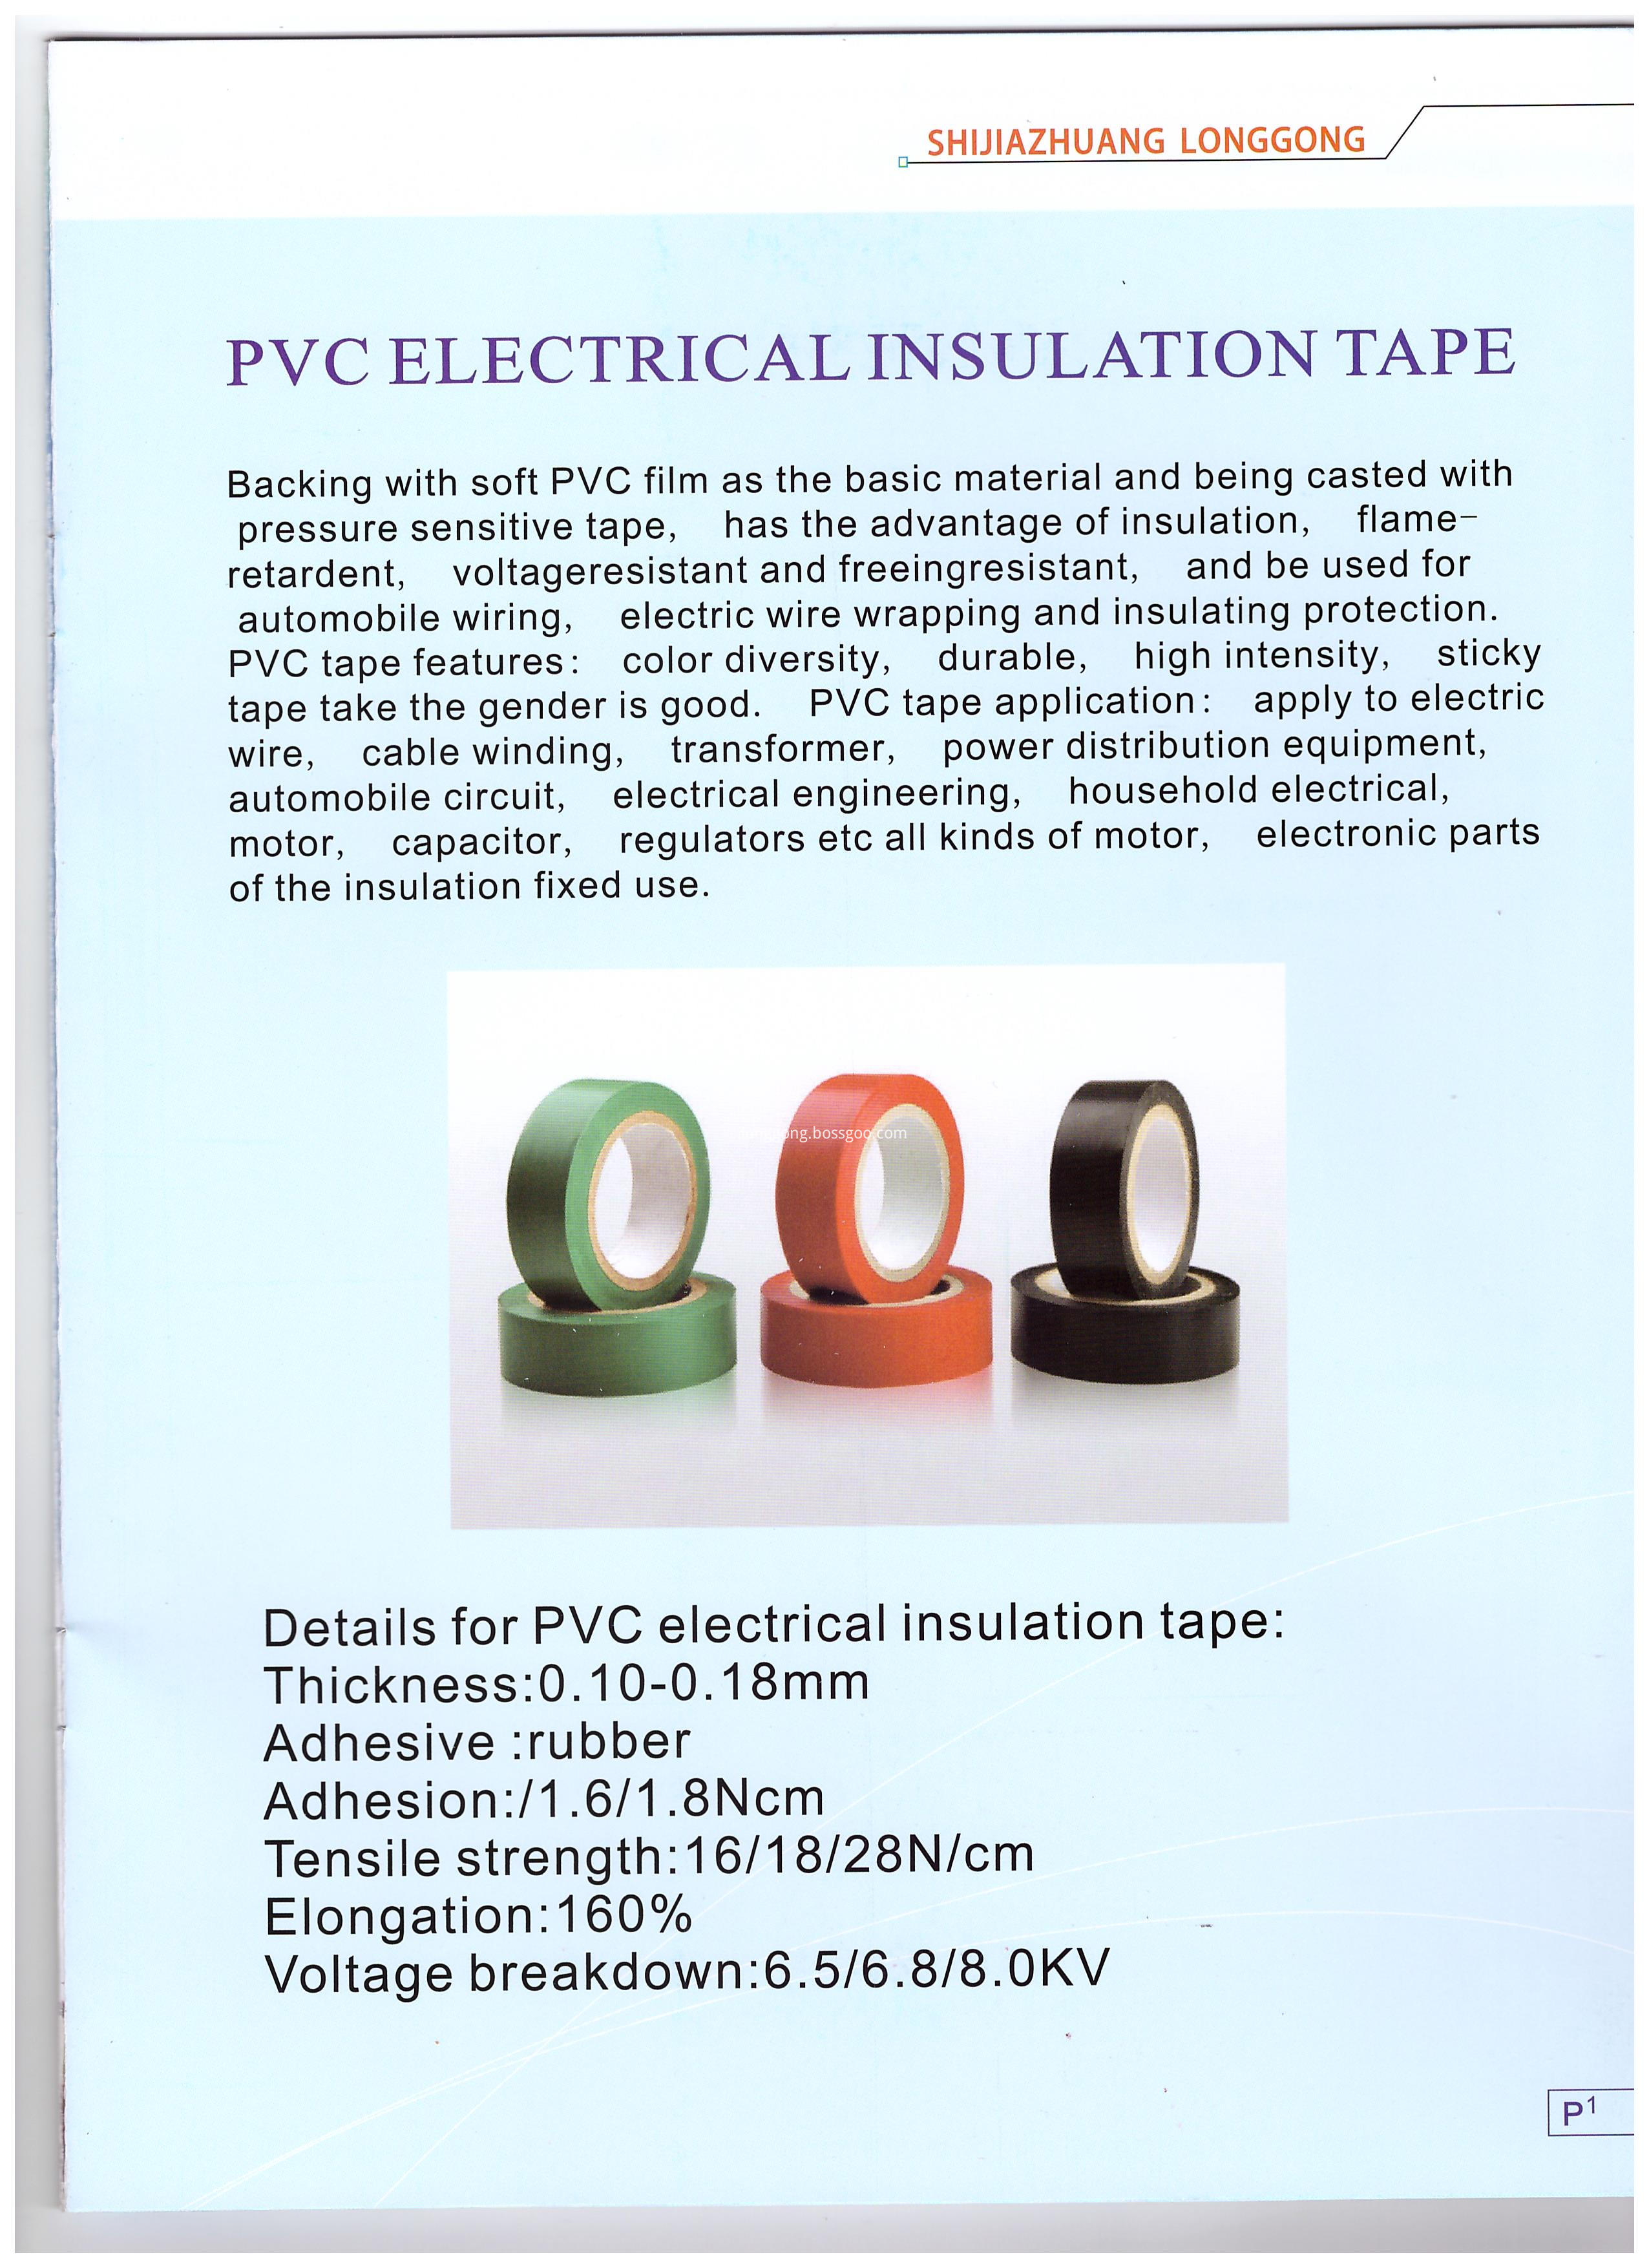 PVC Adhesive Electrical Insulation Tape